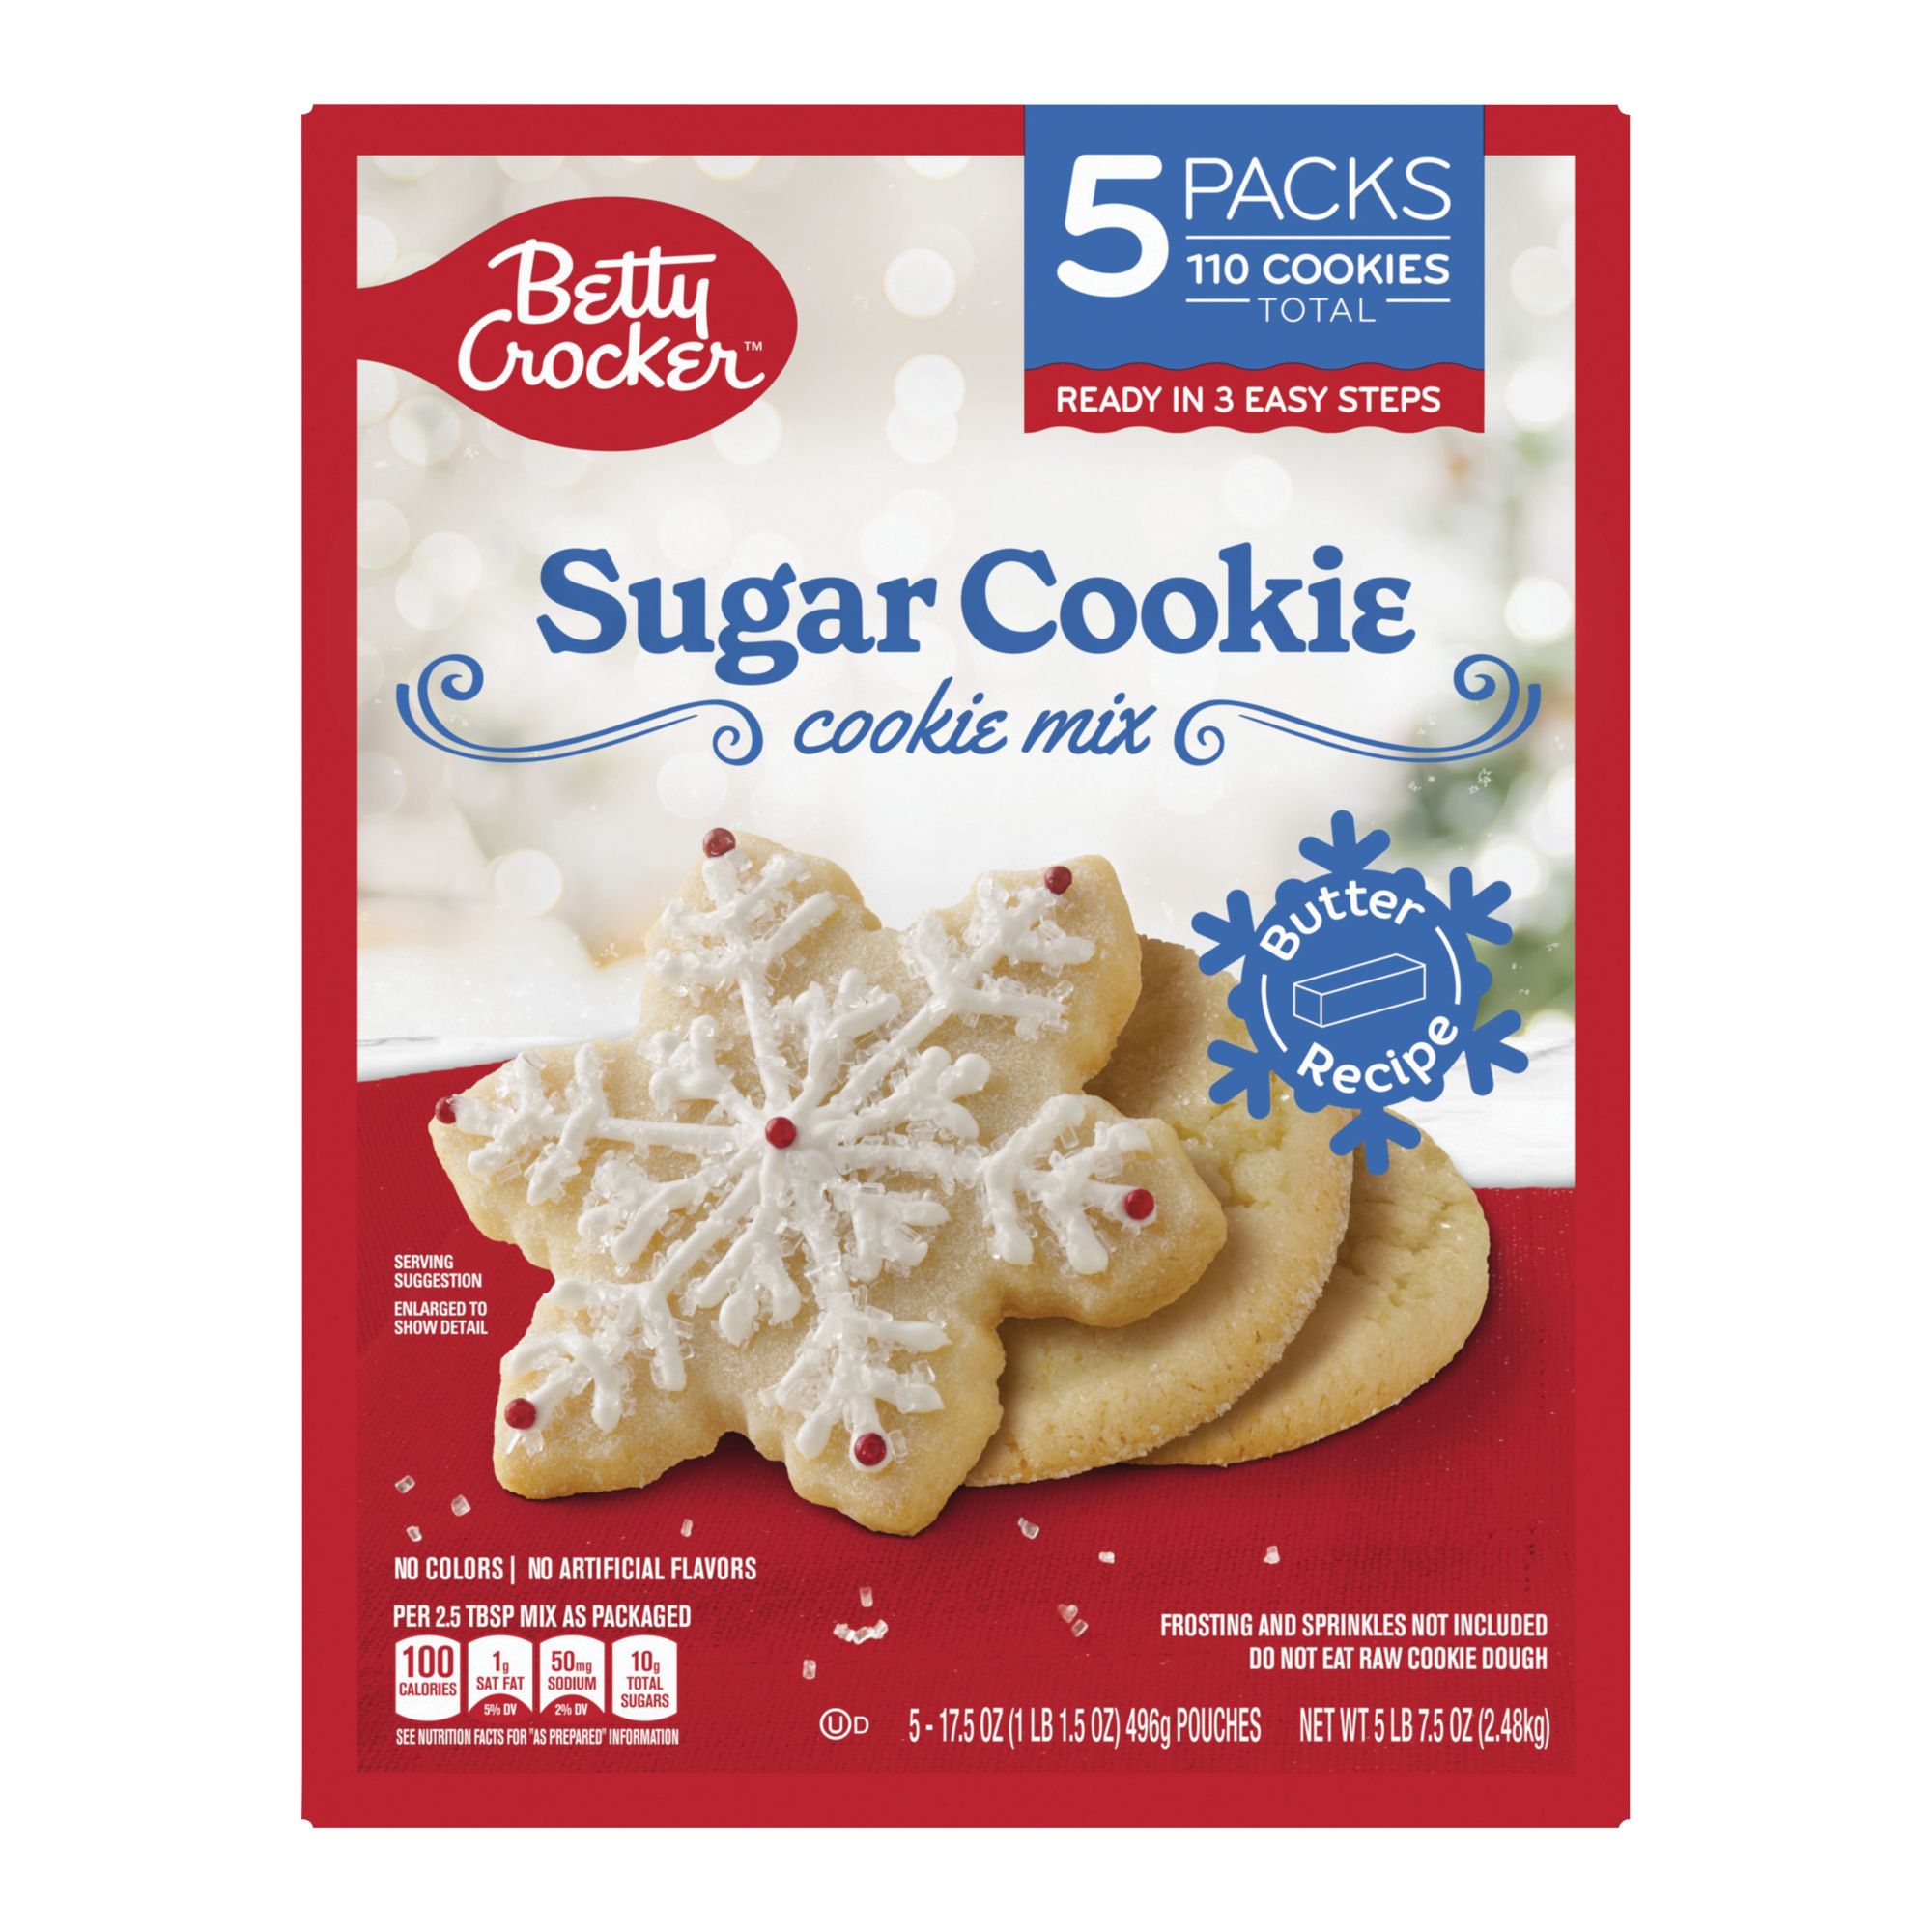 Easy Bake Oven Cookie Mix Recipe